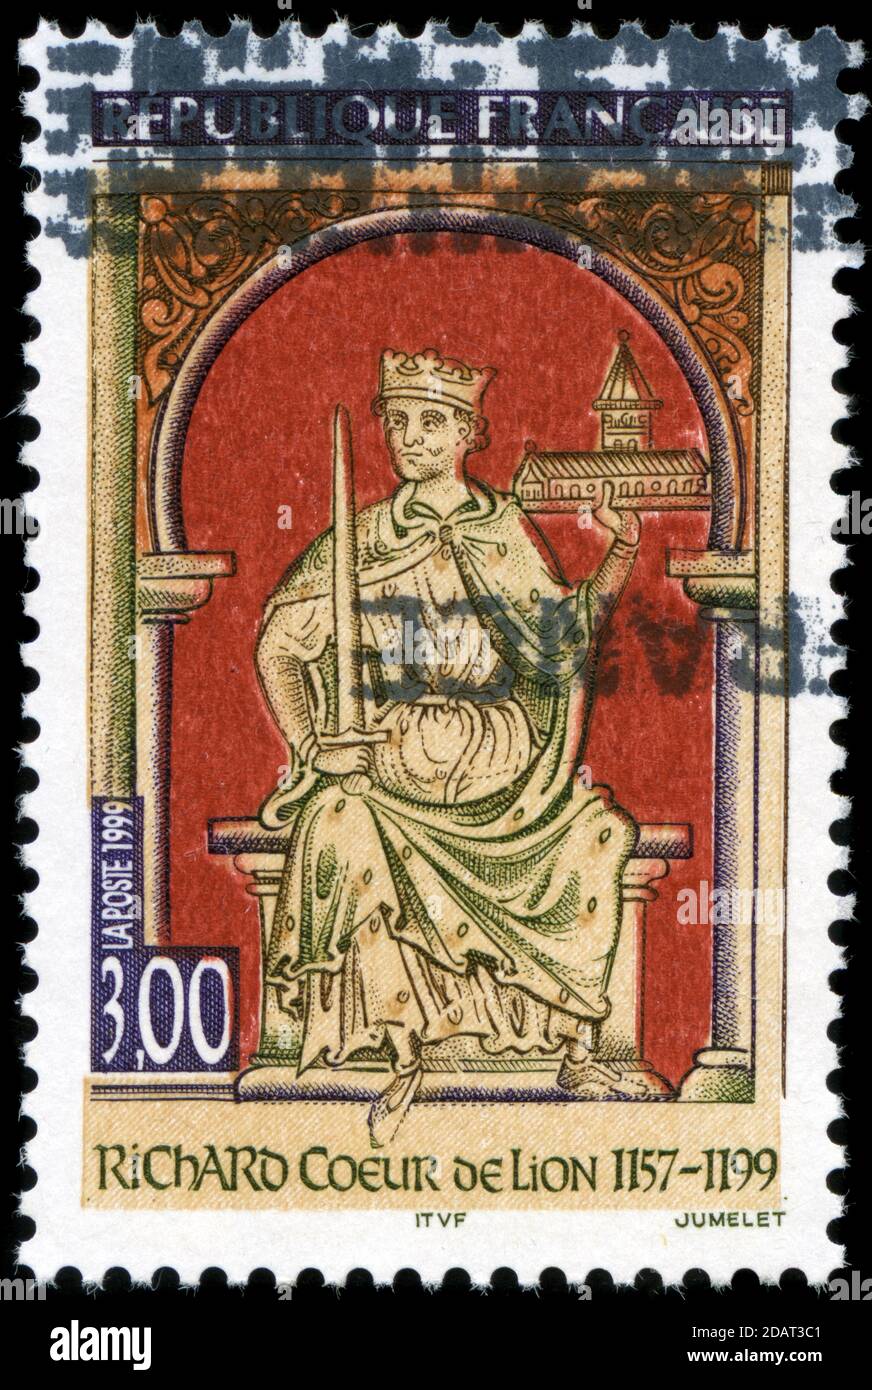 Postage stamp from France in the Famous people series issued in 1999. Richard I (8 September 1157 – 6 April 1199) was King of England from 6 July 1189 until his death.He was known as Cœur de Lion, or Richard the Lionheart, Ricardo Corazón de León, even before his accession, because of his reputation as a great military leader and warrior. Stock Photo